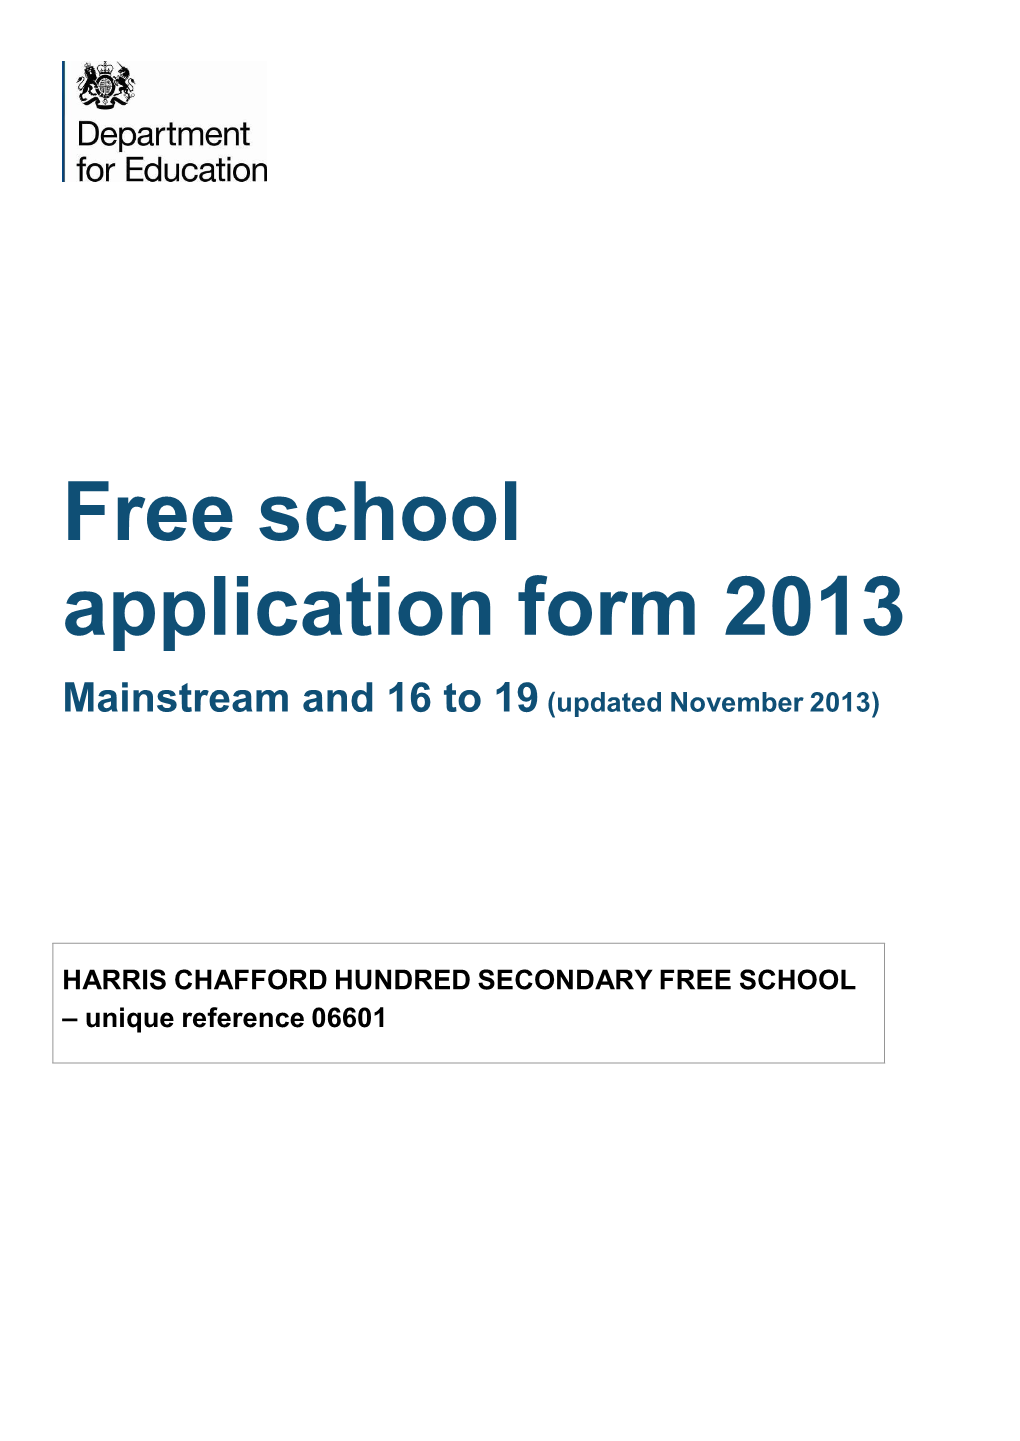 HARRIS CHAFFORD HUNDRED SECONDARY FREE SCHOOL – Unique Reference 06601 Contents